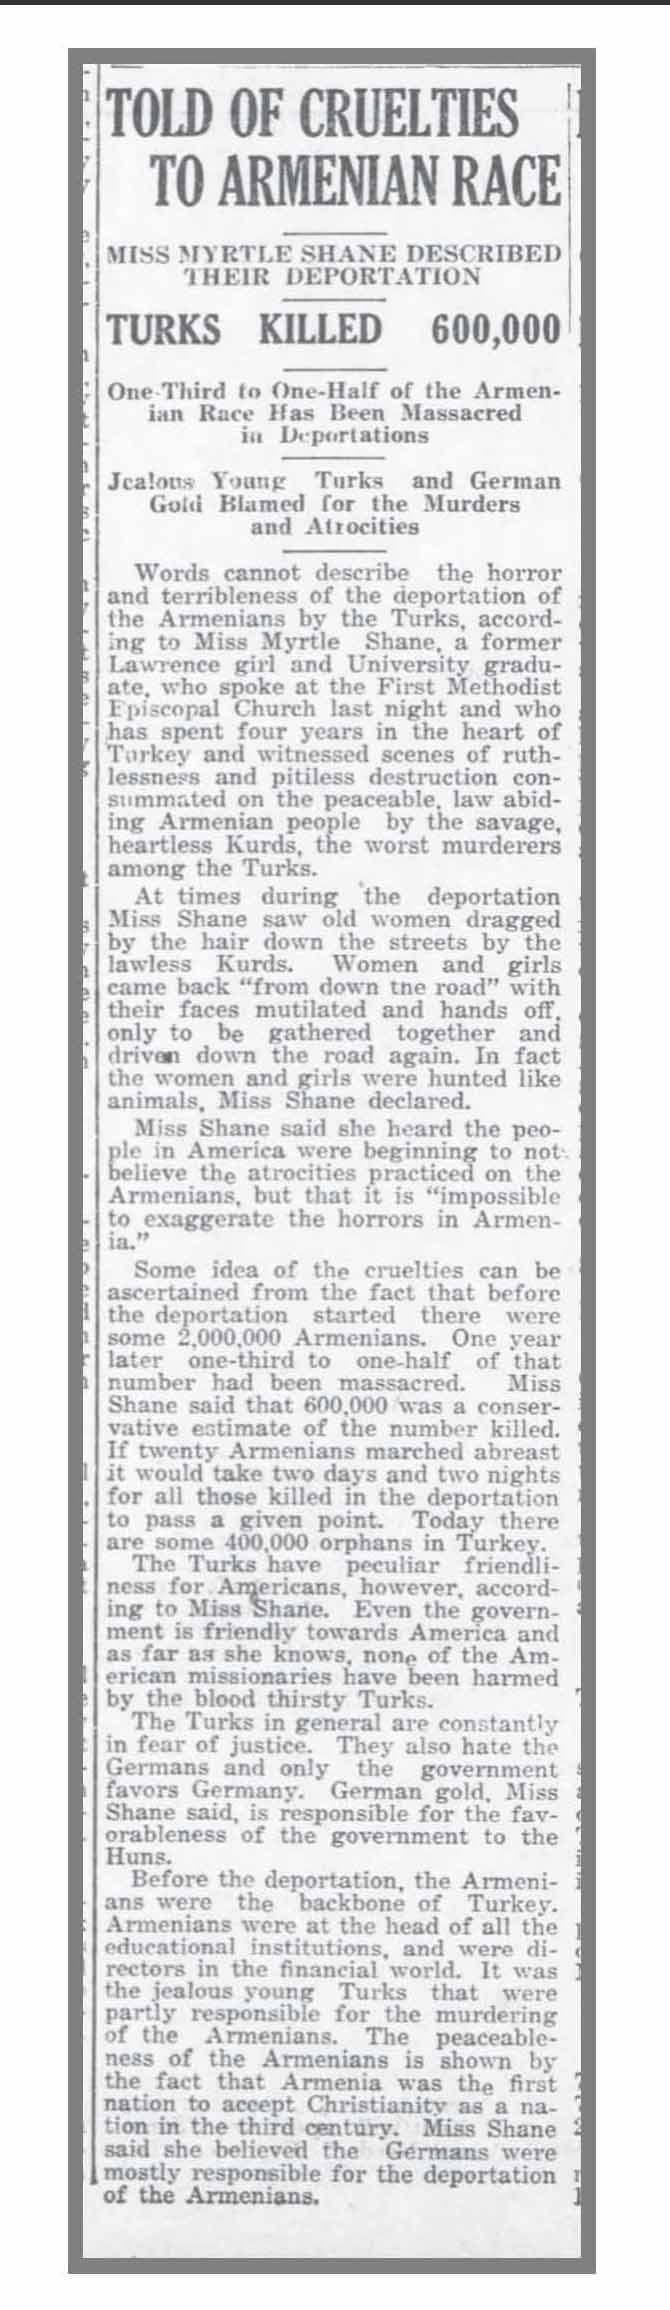 "Told of Cruelties to Armenian Race" article from the Lawrence Journal World, January 3, 1918.